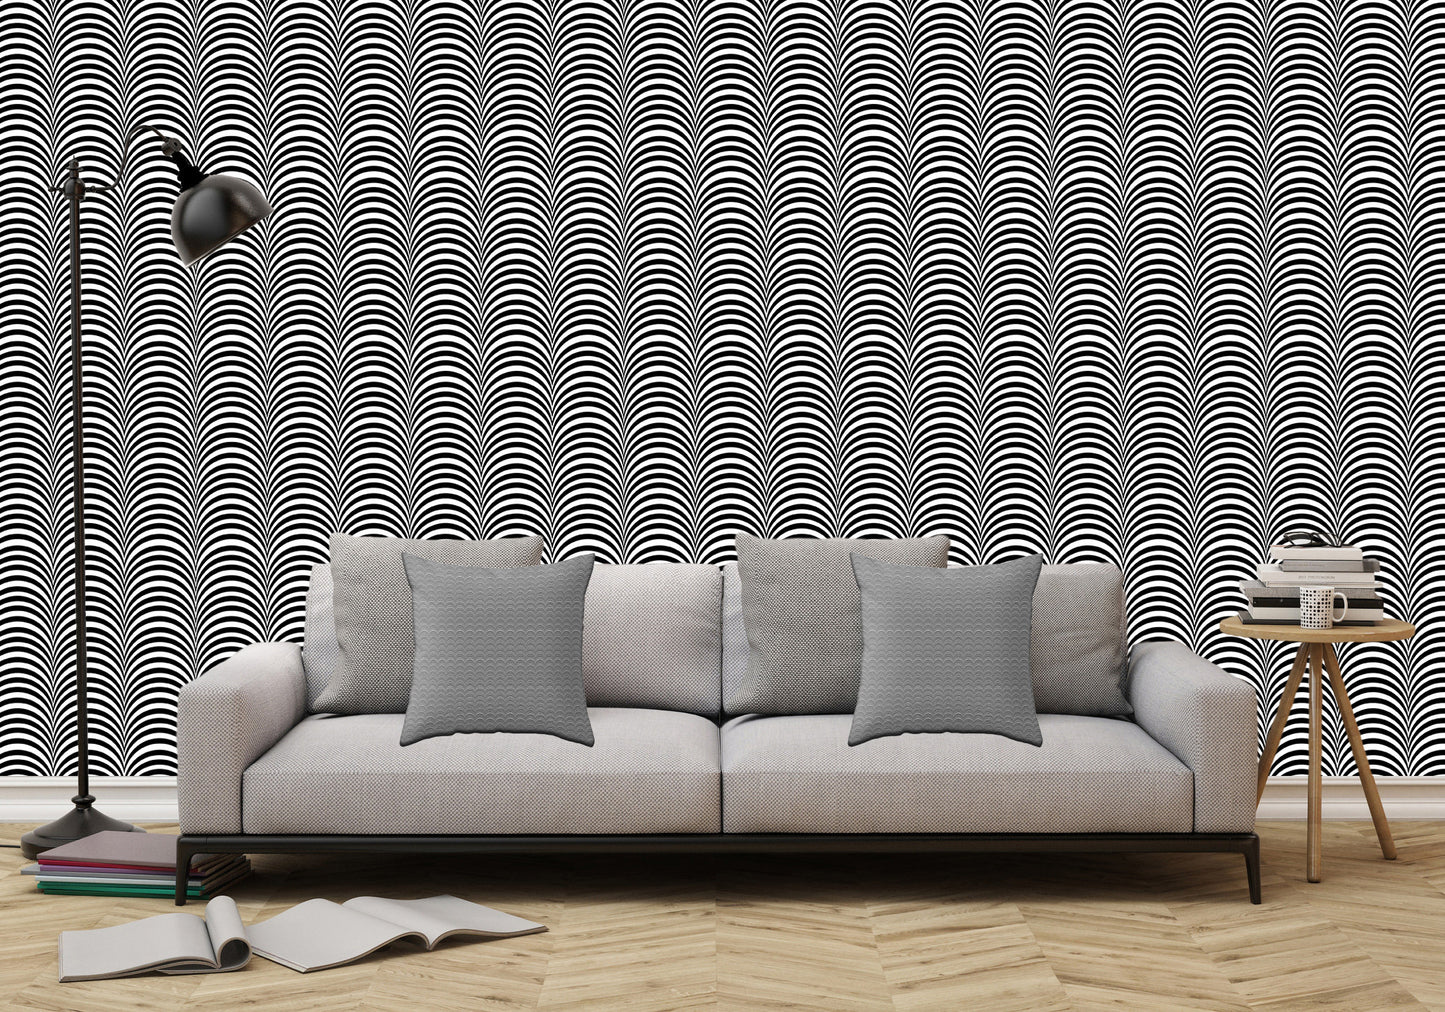 Black and White Scallop Illustration - Adhesive Wallpaper - Removable Wallpaper - Wall Sticker - Full Size Wall Mural  - PIPAFINEART